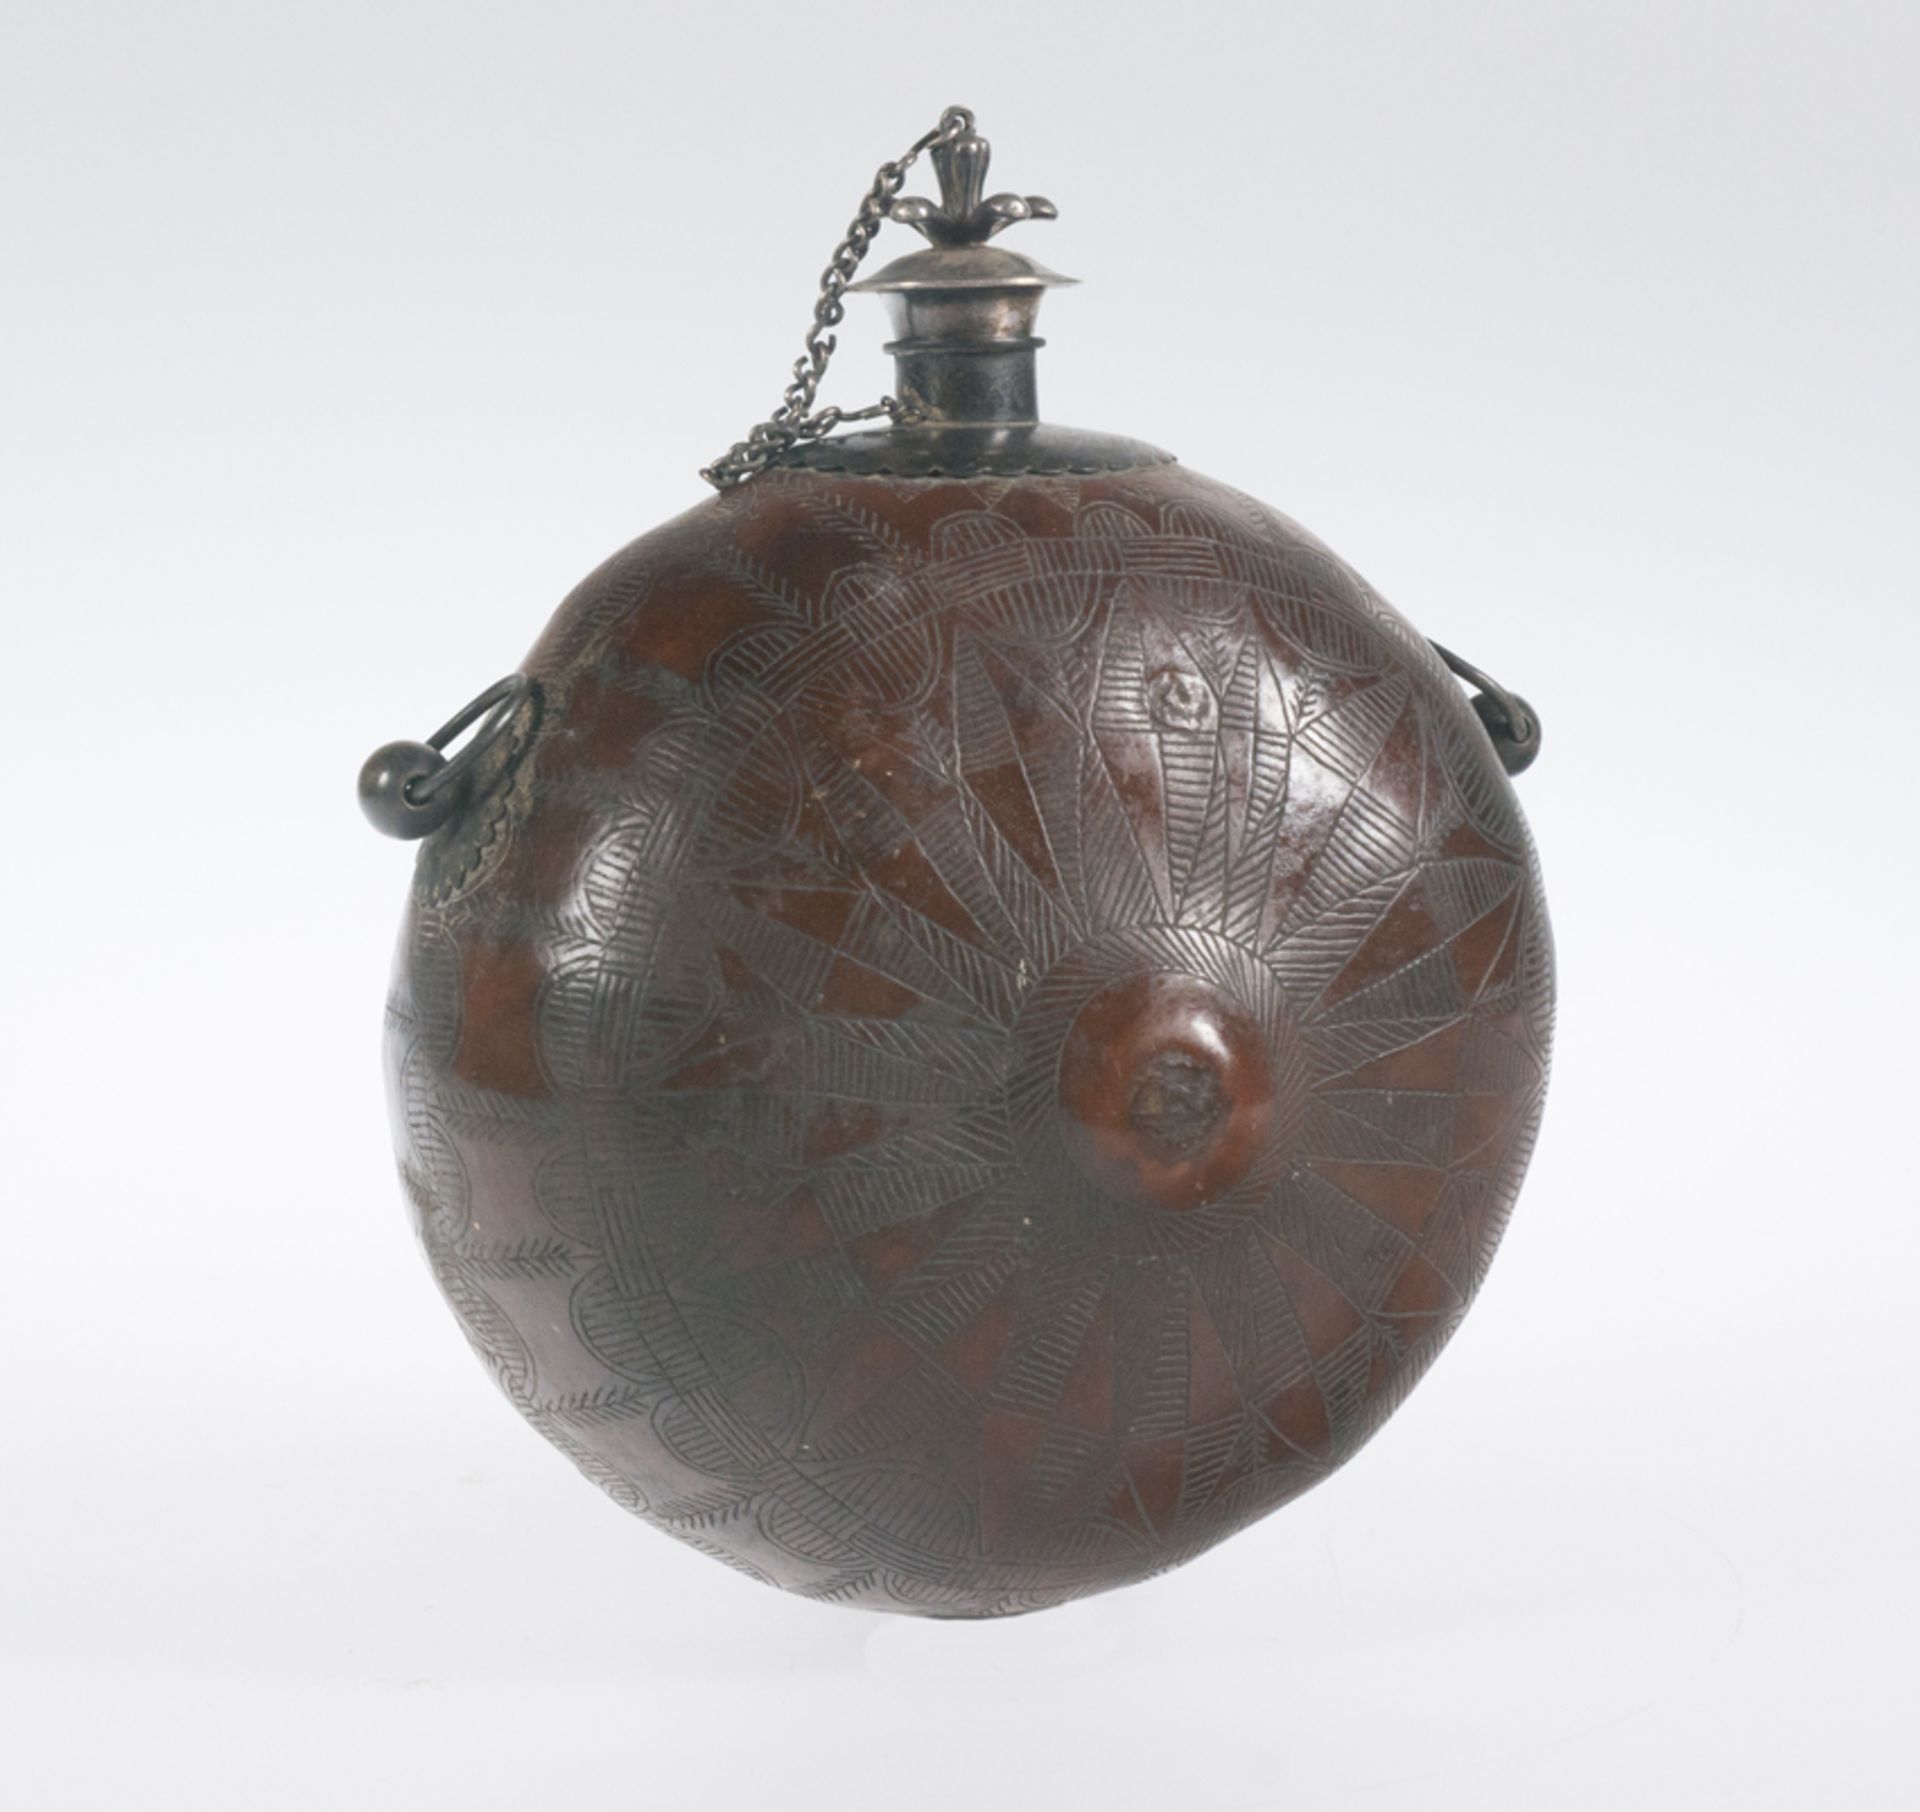 Canteen. Engraved gourd with silver applications. Colonial work. Mexico or Peru. 18th century.